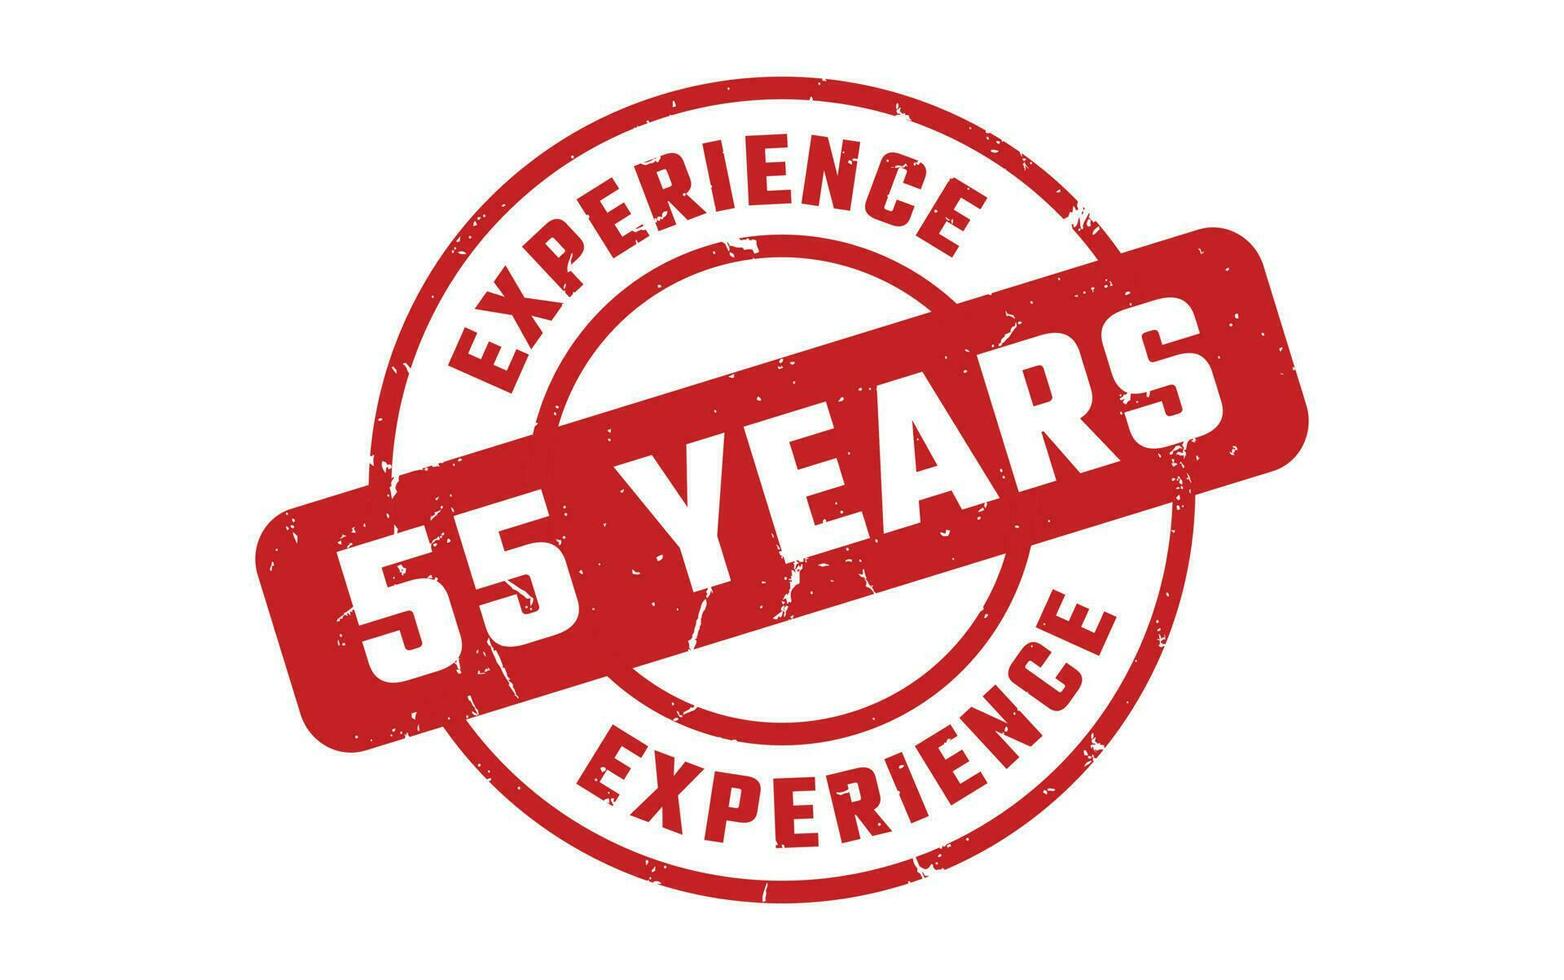 55 Years Experience Rubber Stamp vector